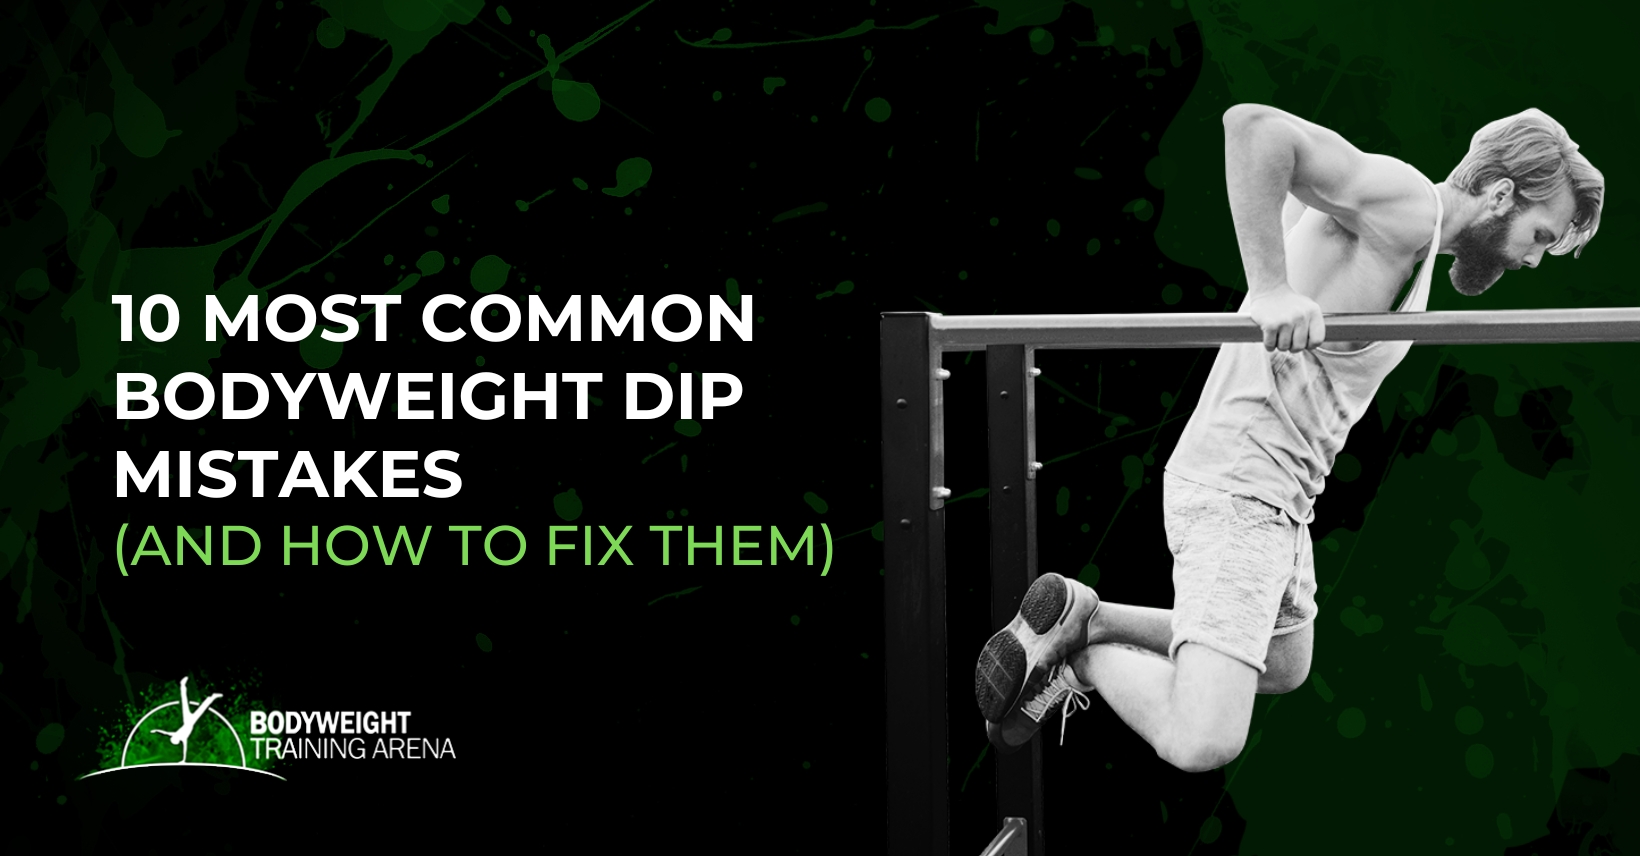 10_Most_Common_Bodyweight_Dip_Mistakes_and_how_to_fix_them